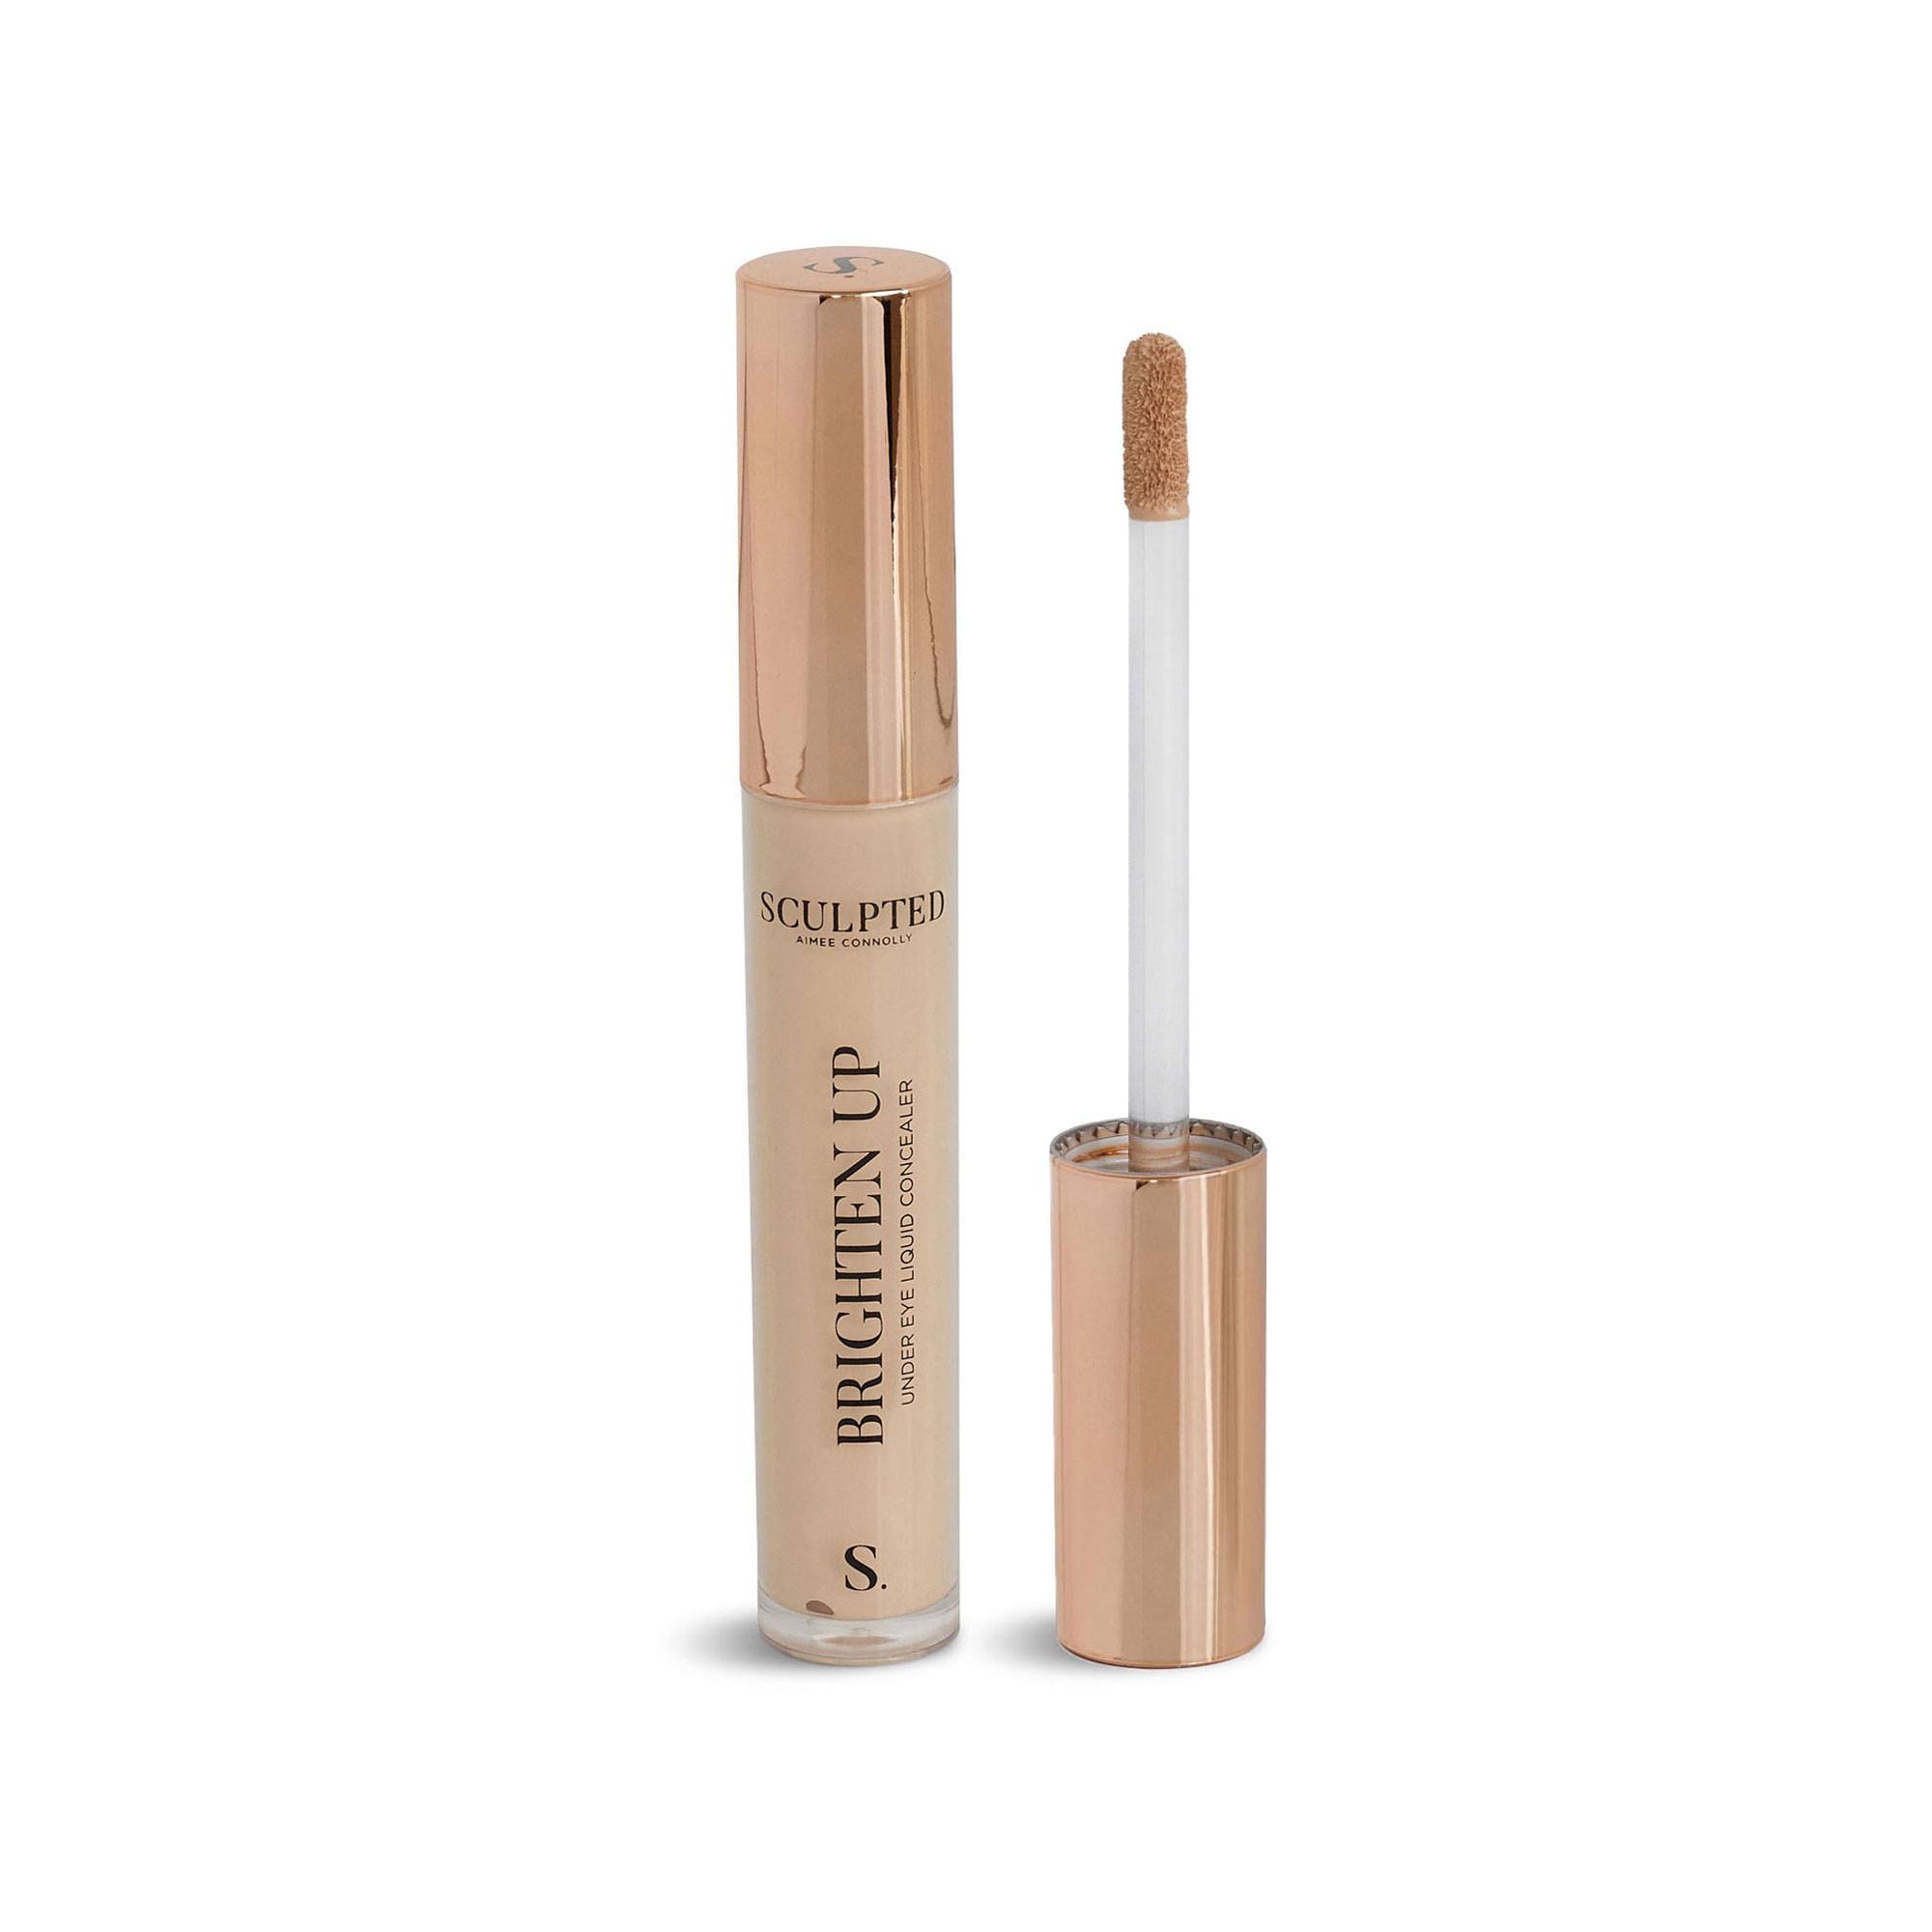 Sculpted by Aimee Connolly Brighten Up Concealer